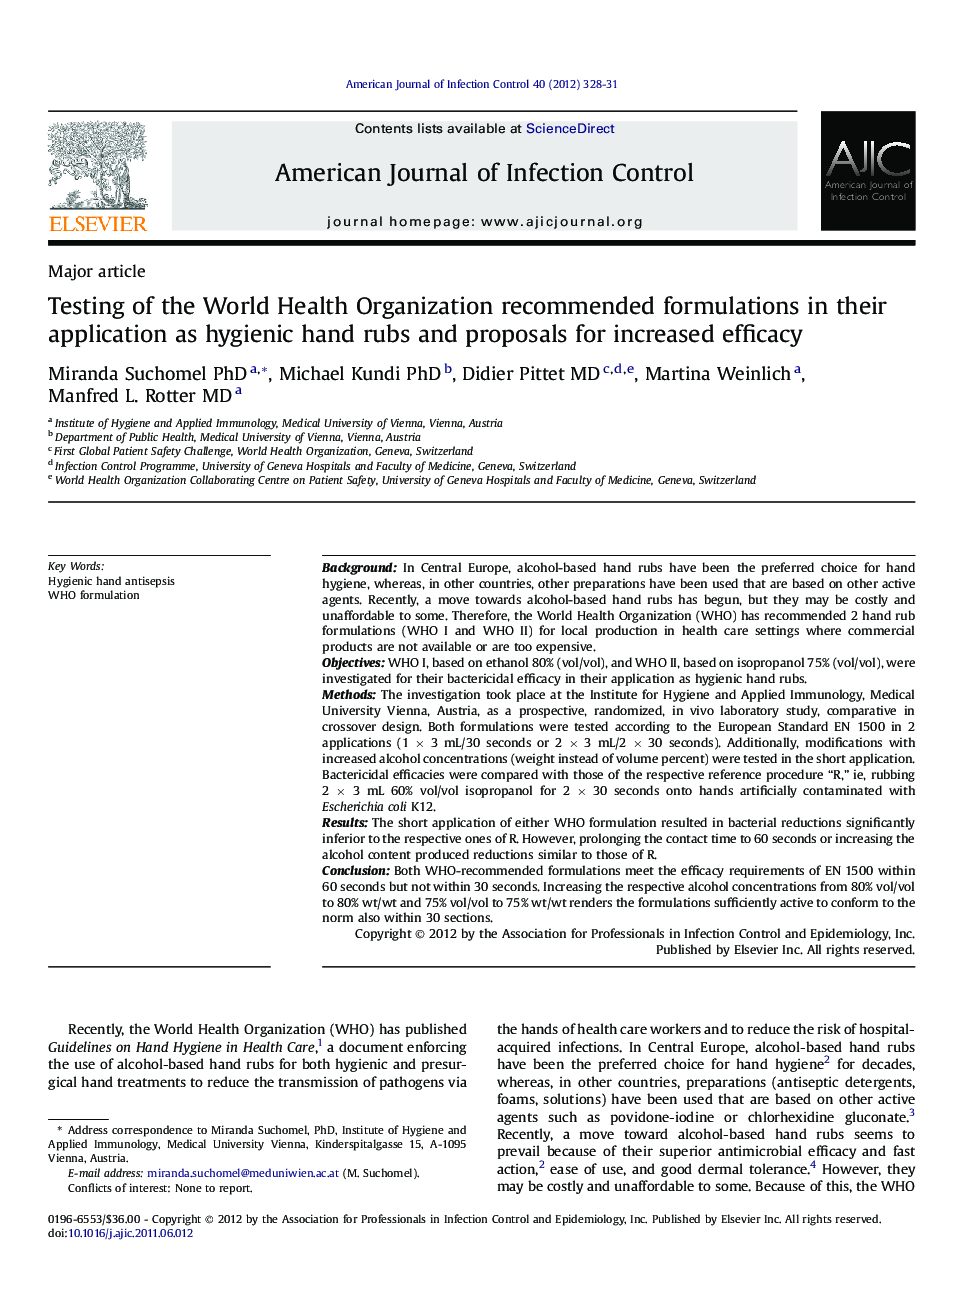 Testing of the World Health Organization recommended formulations in their application as hygienic hand rubs and proposals for increased efficacy 